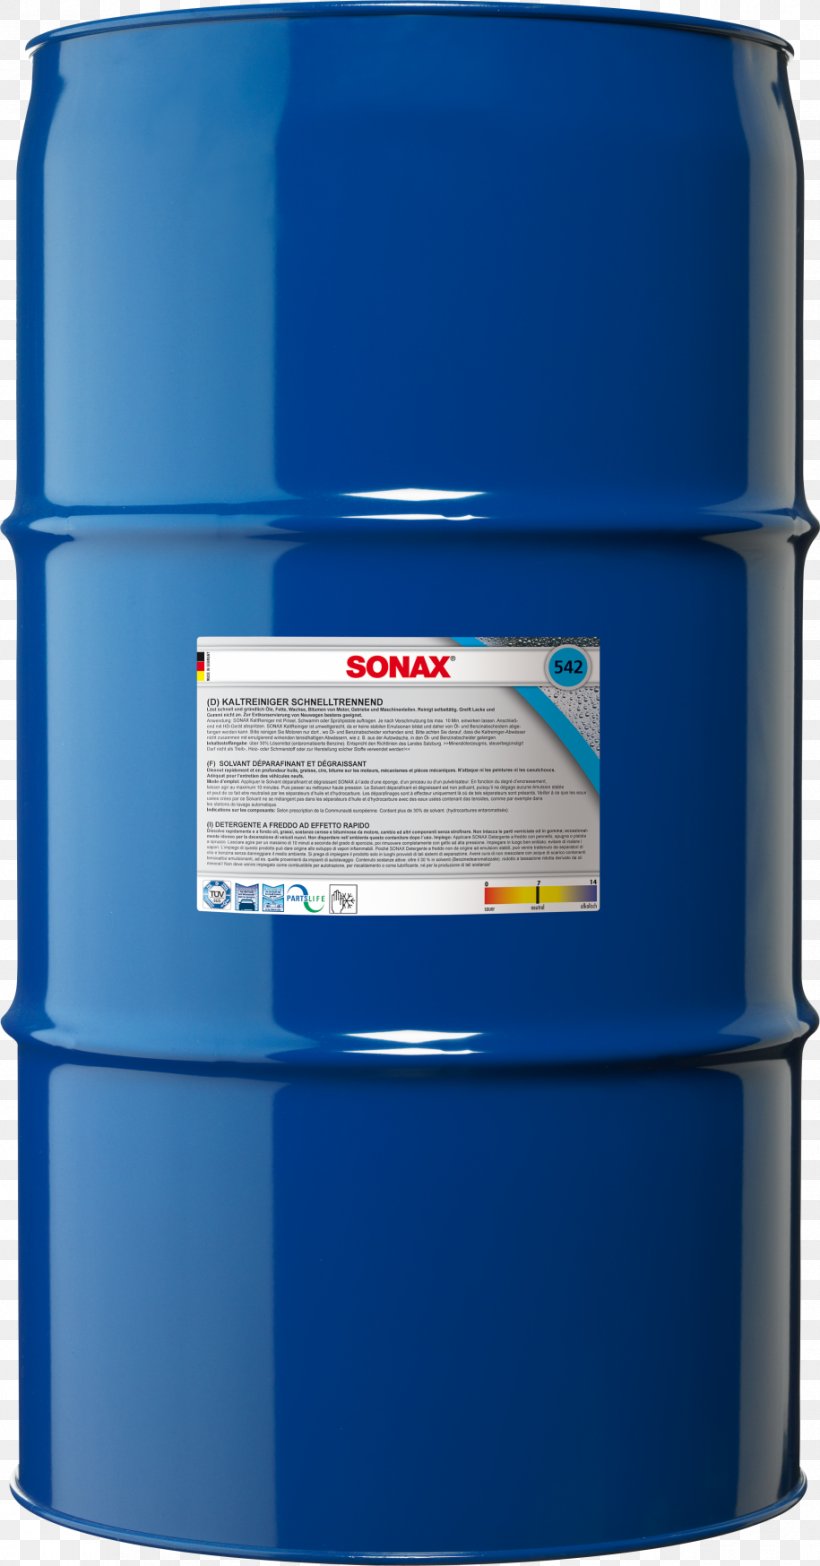 Car Sonax Germany Industry Cleaning, PNG, 915x1748px, Car, Chemical Industry, Cleaning, Cylinder, Electric Blue Download Free